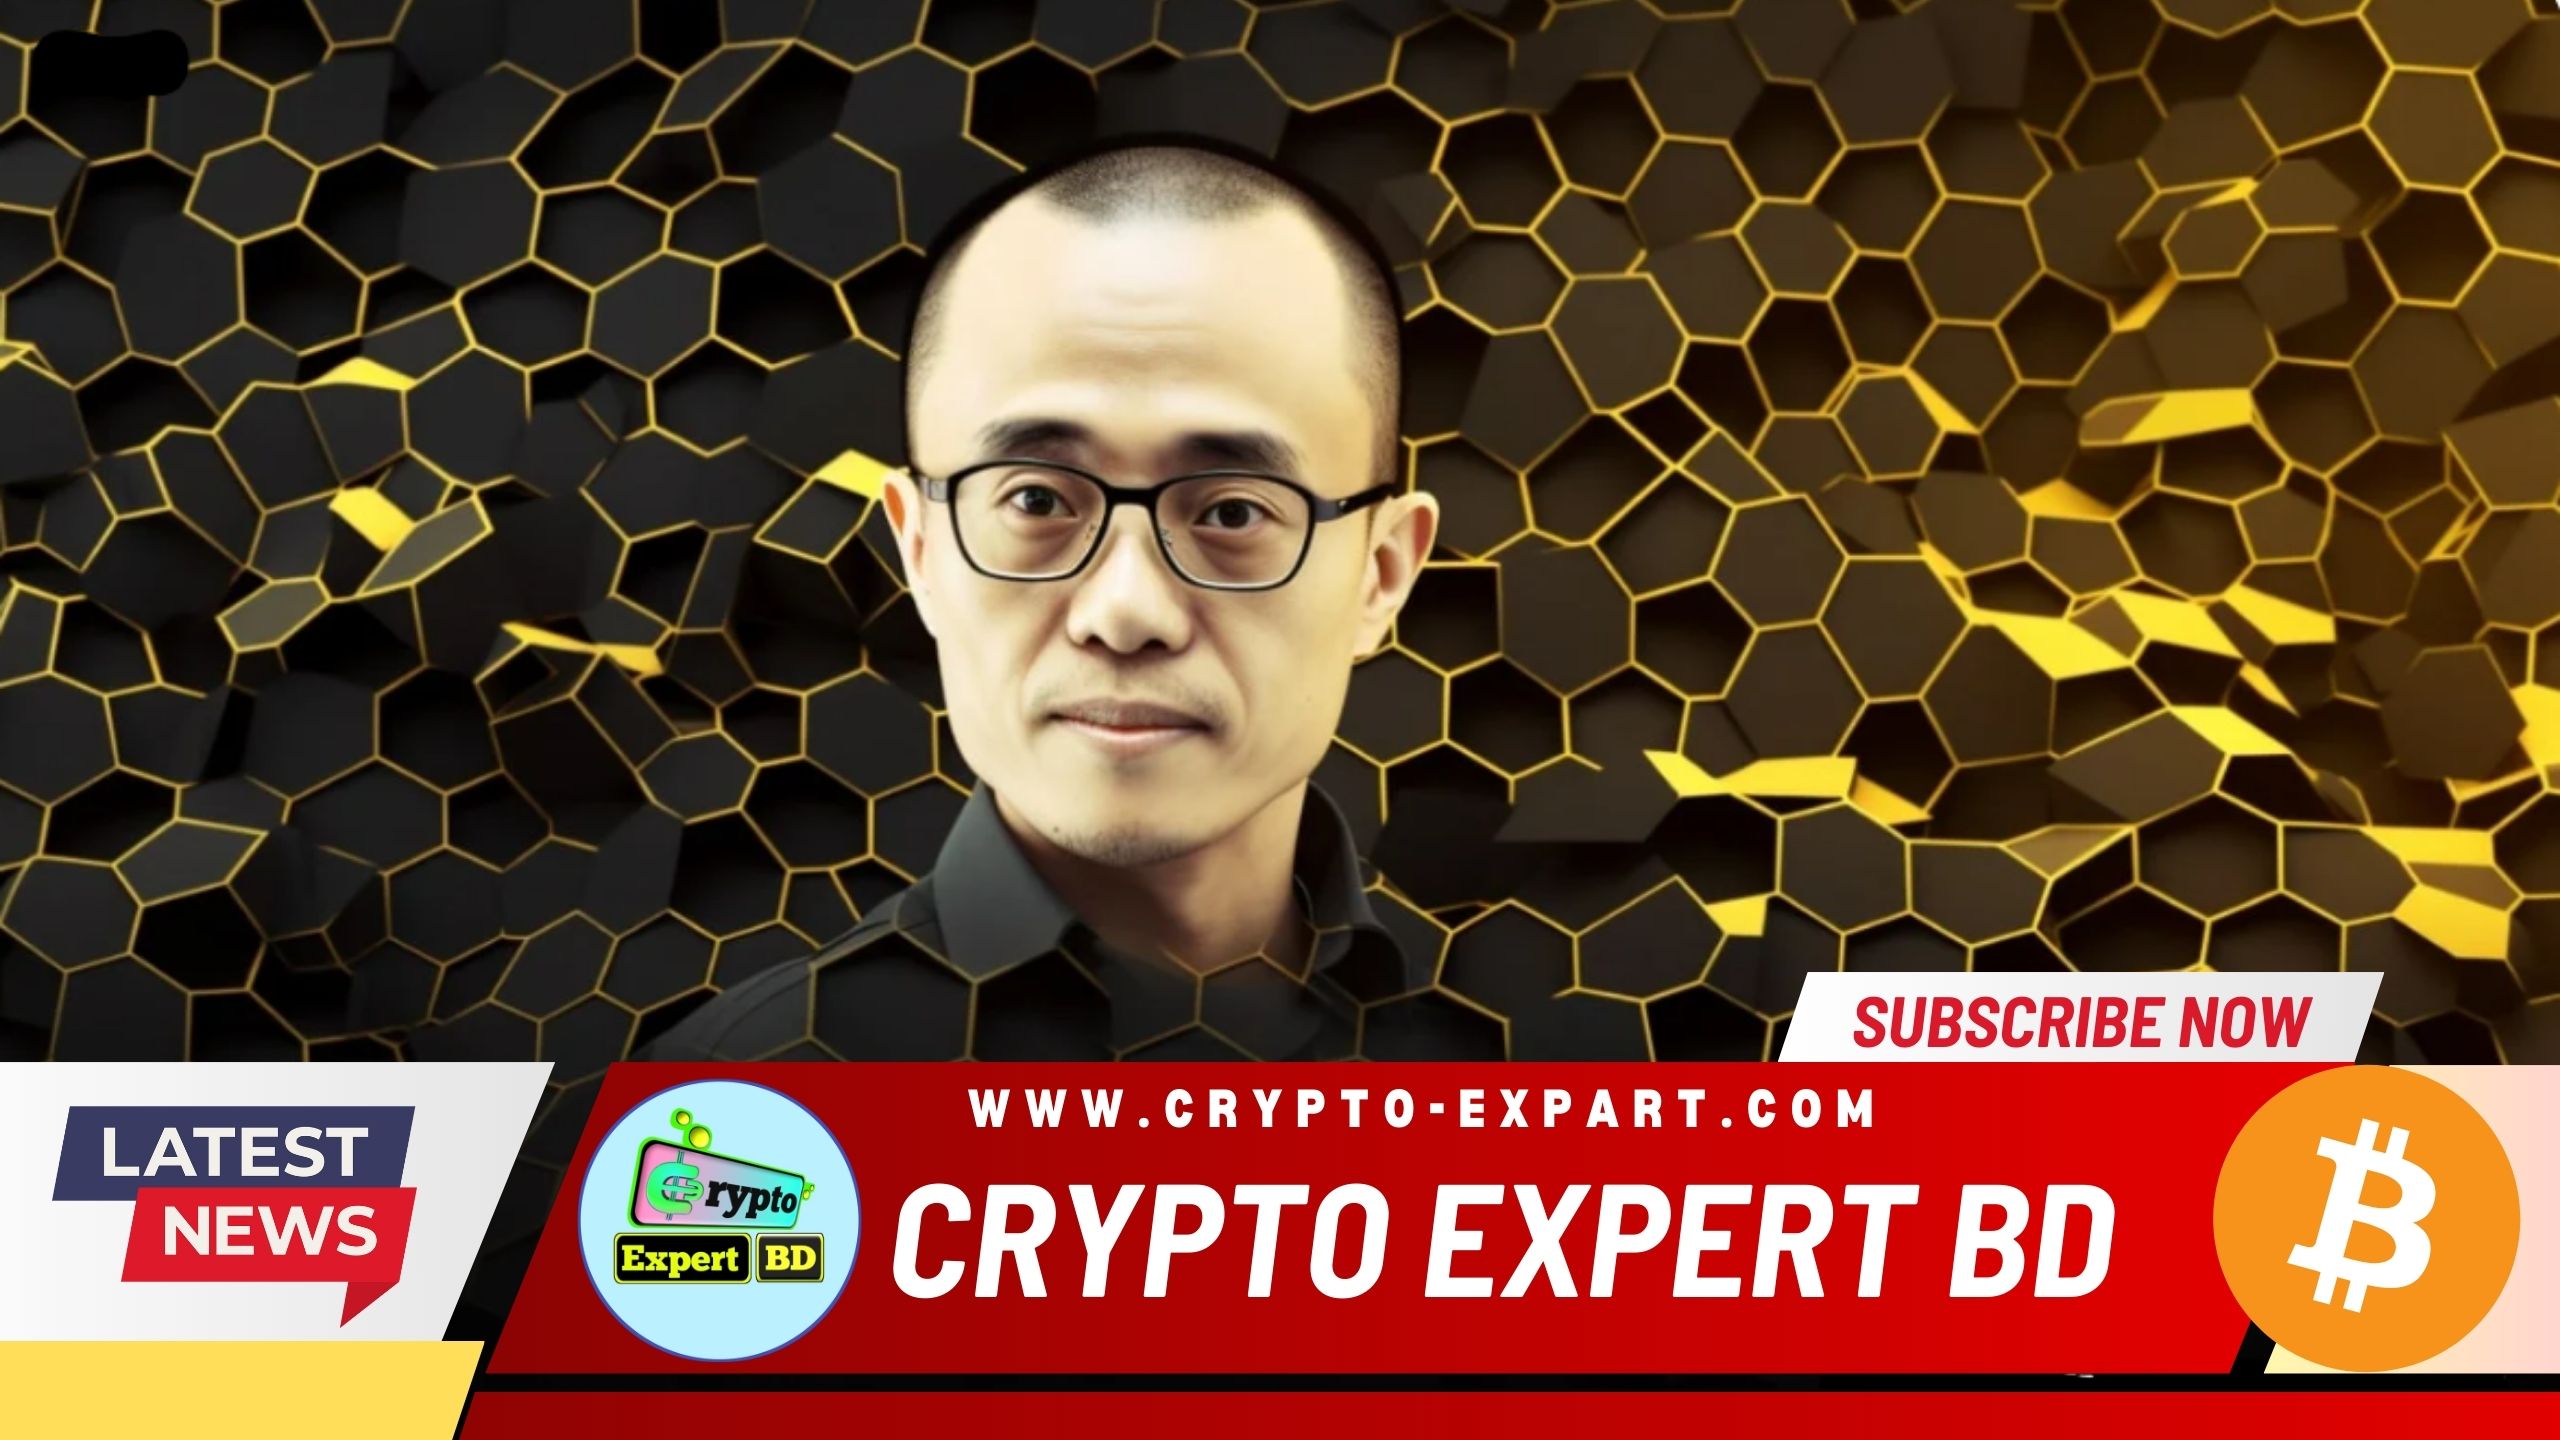 Binance Founder Changpeng Zhao Faces Potential Incarceration as Exchange Thrives